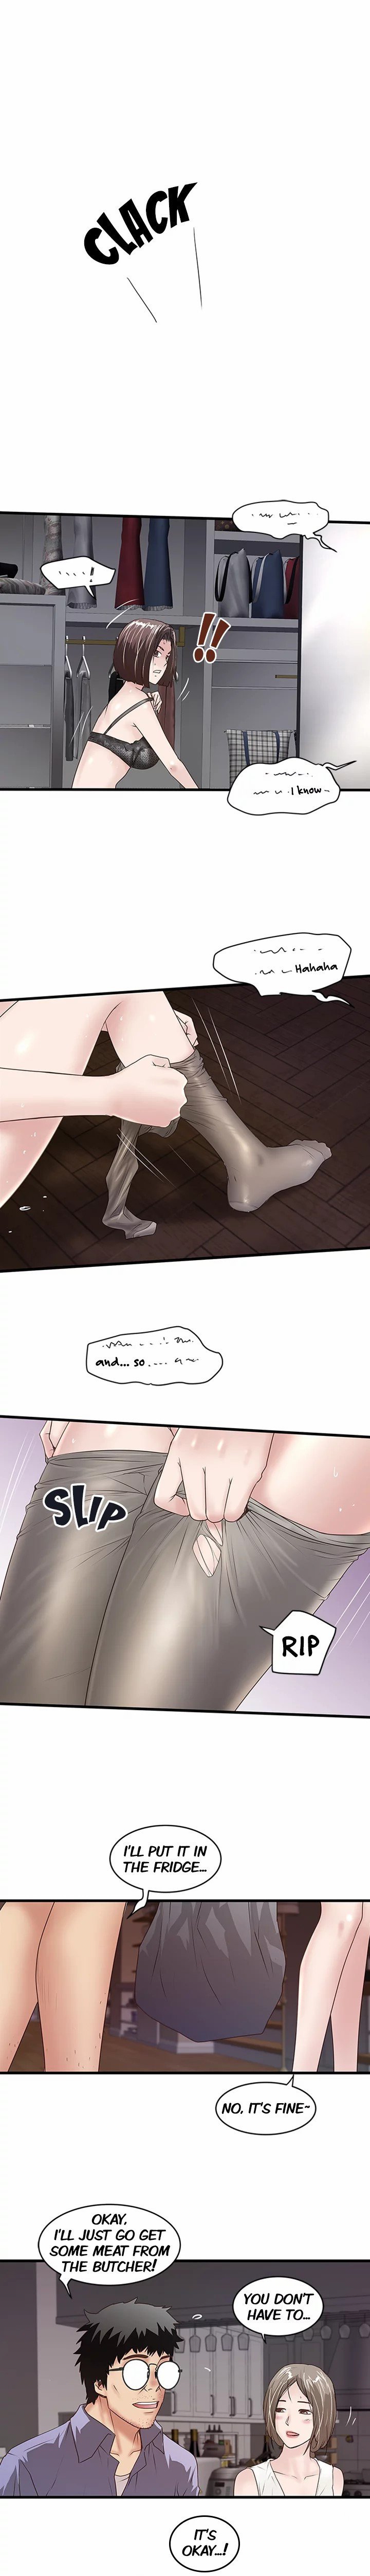 the-housemaid-chap-31-0